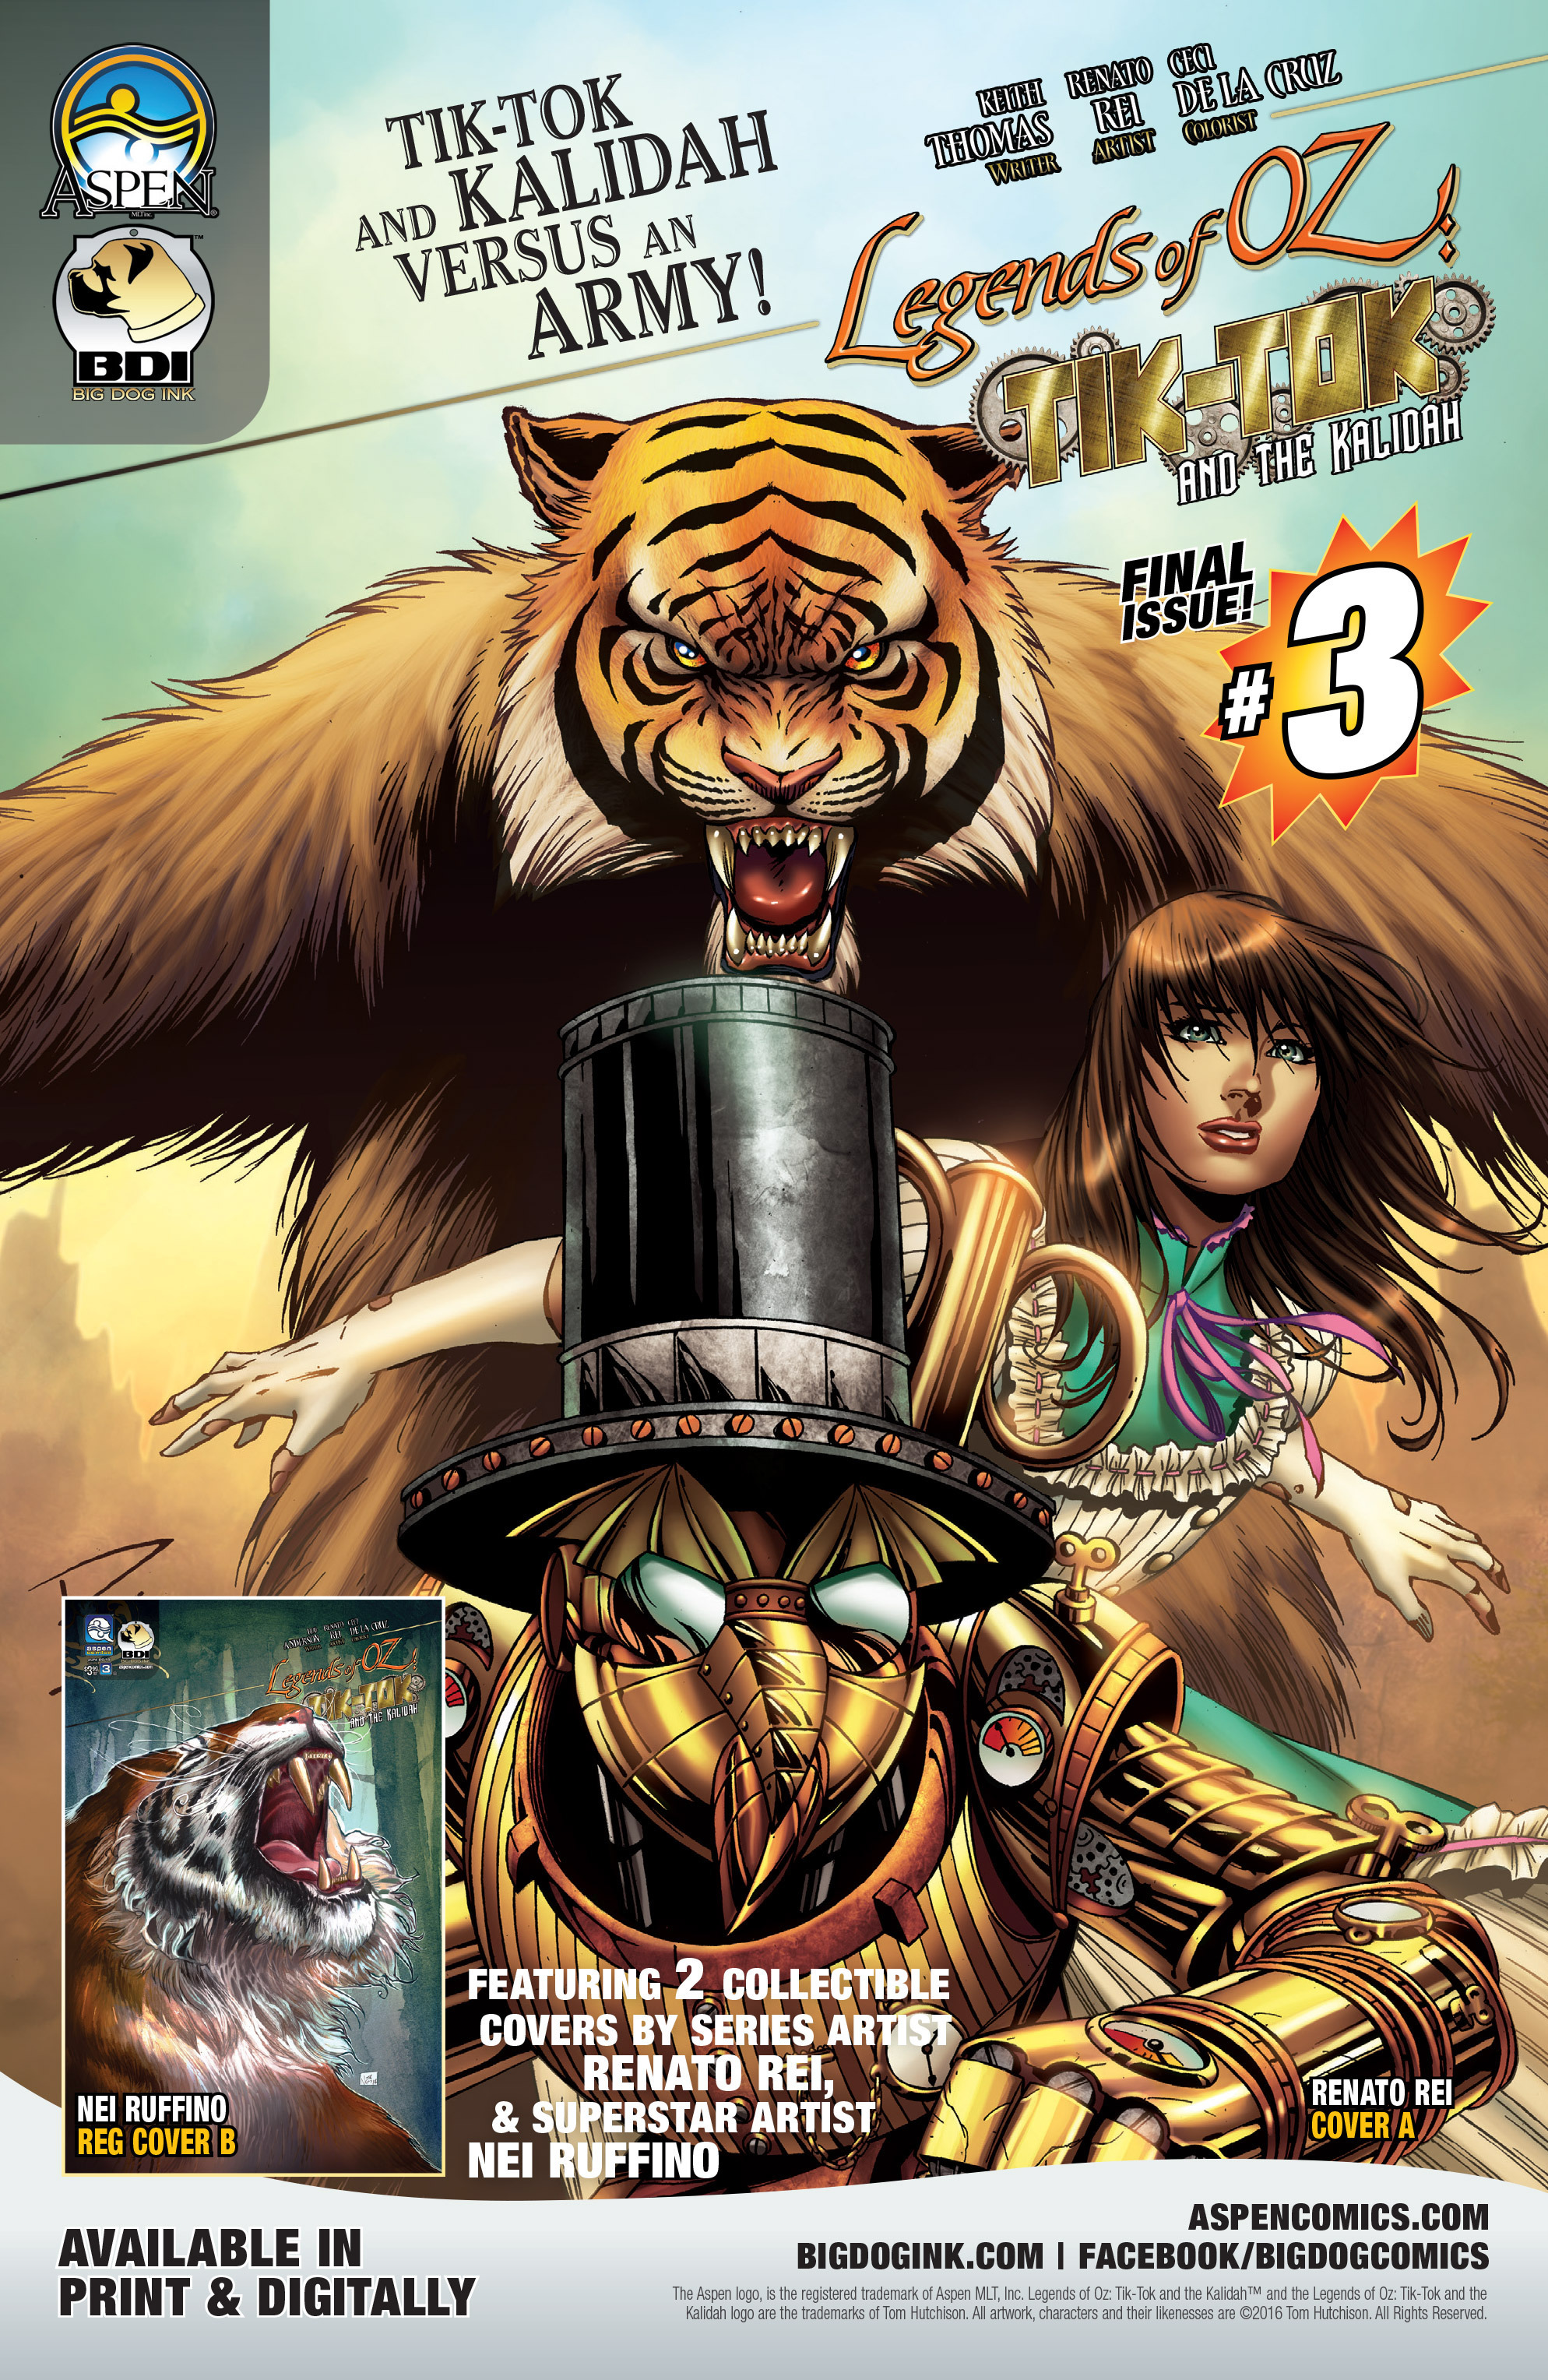 Read online Legends of Oz: Tik-Tok and the Kalidah comic -  Issue #2 - 26